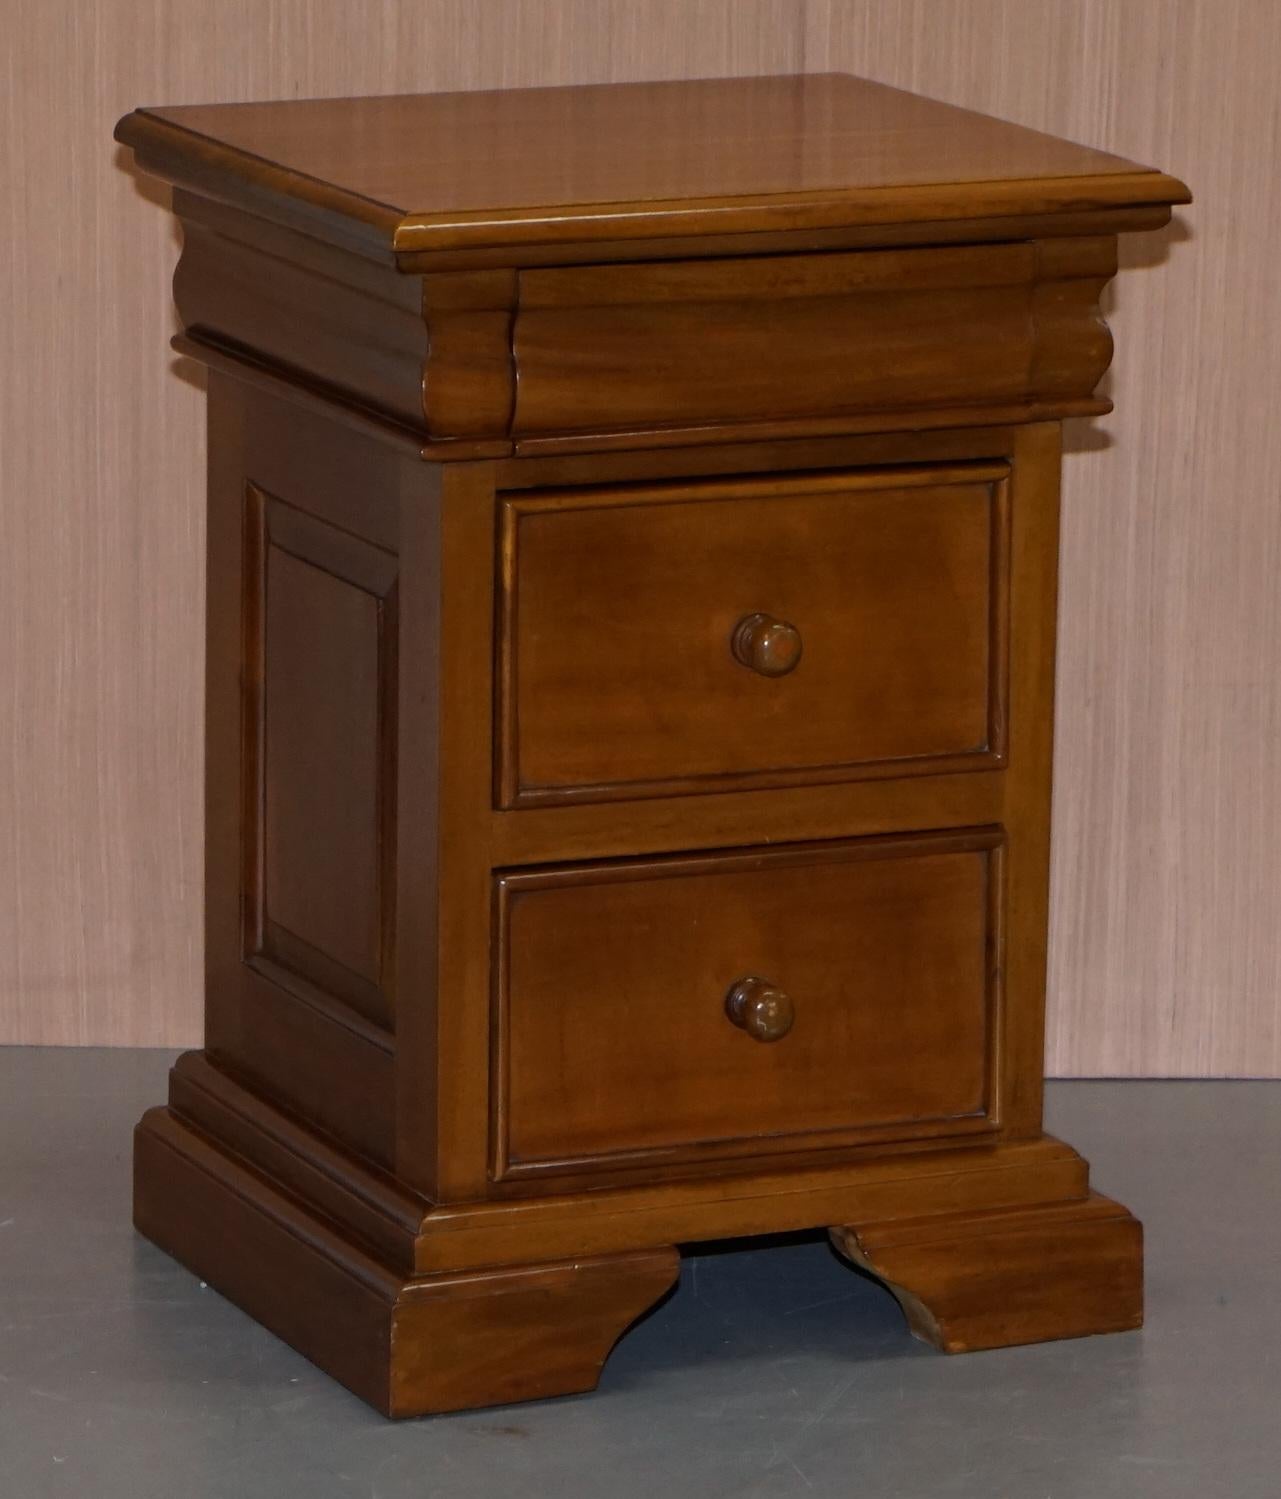 We are delighted to offer for sale this lovely pair of light mahogany bedside table chests of drawers

A very good looking well made and decorative pair. They are part of a suite, I have the matching pair of tallboy drawers listed under my other